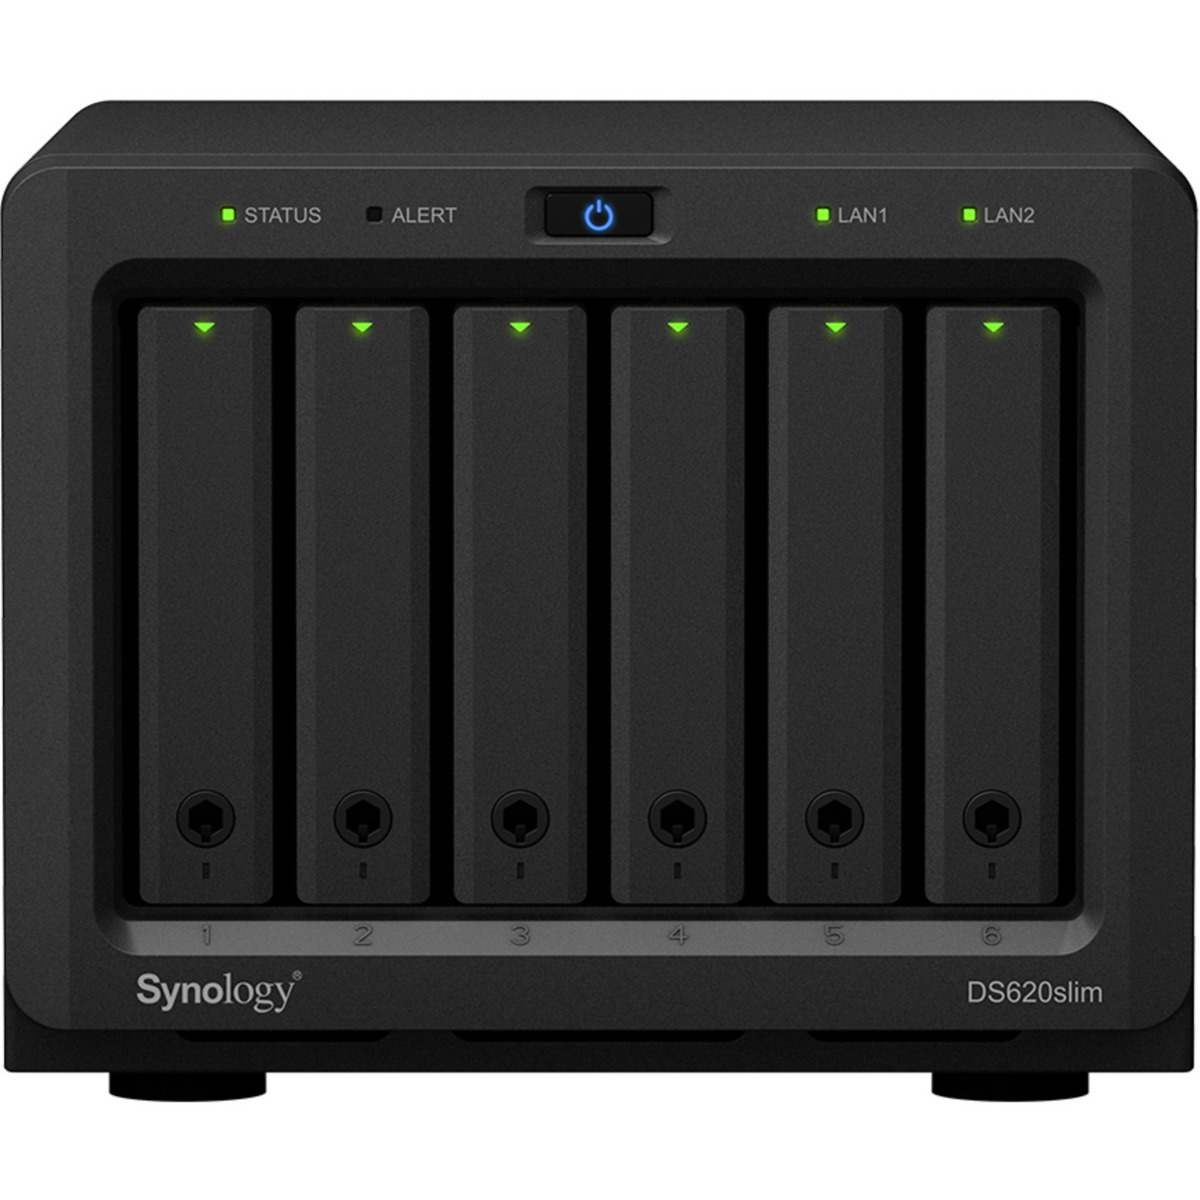 Synology DiskStation DS620slim 12tb 6-Bay Desktop Multimedia / Power User / Business NAS - Network Attached Storage Device 3x4tb Samsung 870 EVO MZ-77E4T0BAM 2.5 560/530MB/s SATA 6Gb/s SSD CONSUMER Class Drives Installed - Burn-In Tested - ON SALE - FREE RAM UPGRADE DiskStation DS620slim